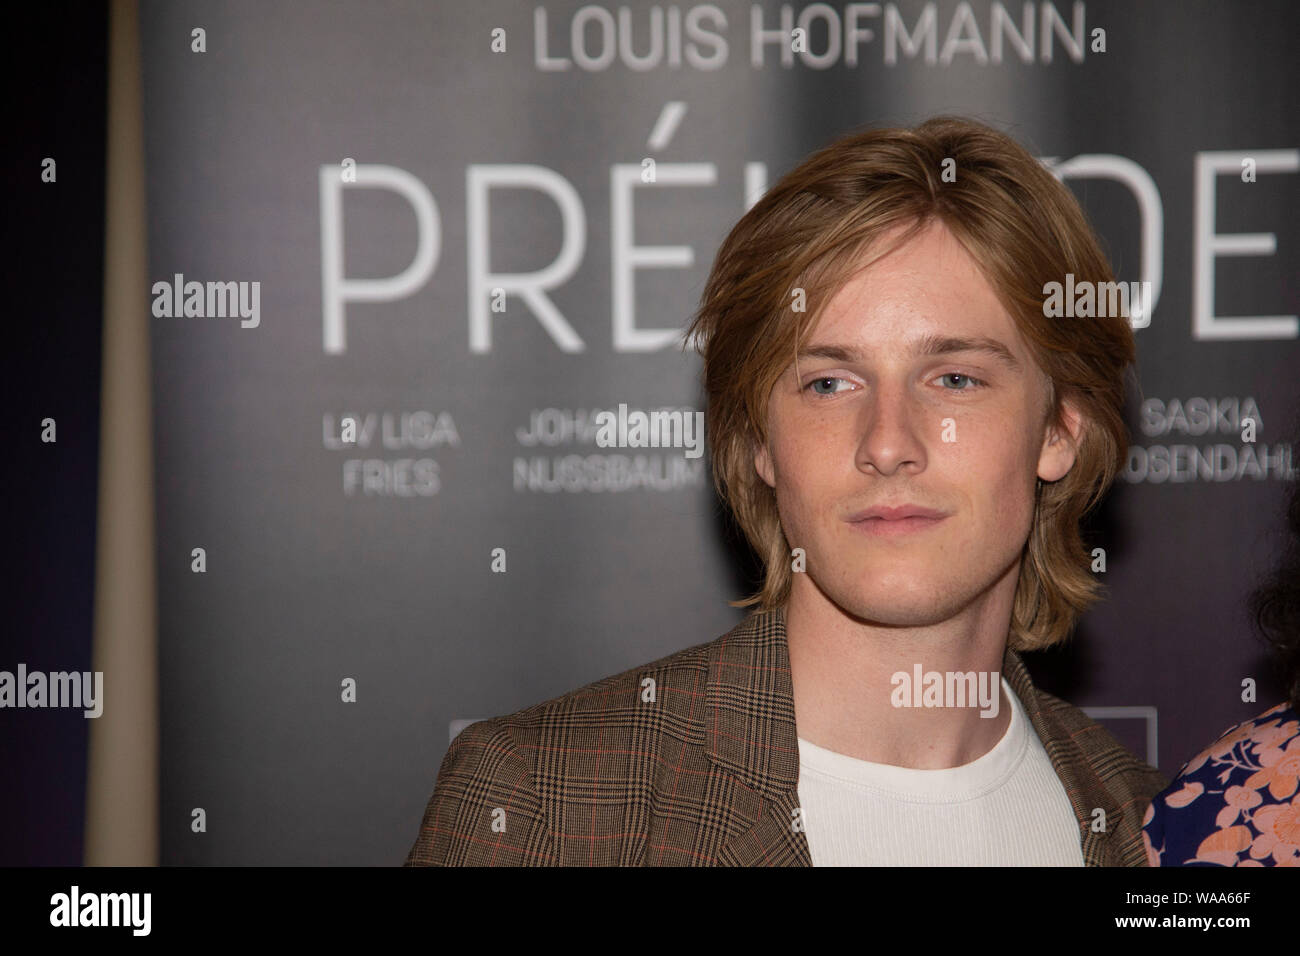 Cologne, Deutschland. 16th Aug, 2019. Louis HOFMANN, Germany, actor, plays  the role of David, Red Carpet, Red Carpet Show, arrival, arrival, film  premiere PRELUDE in Koeln, 09.10.2018.